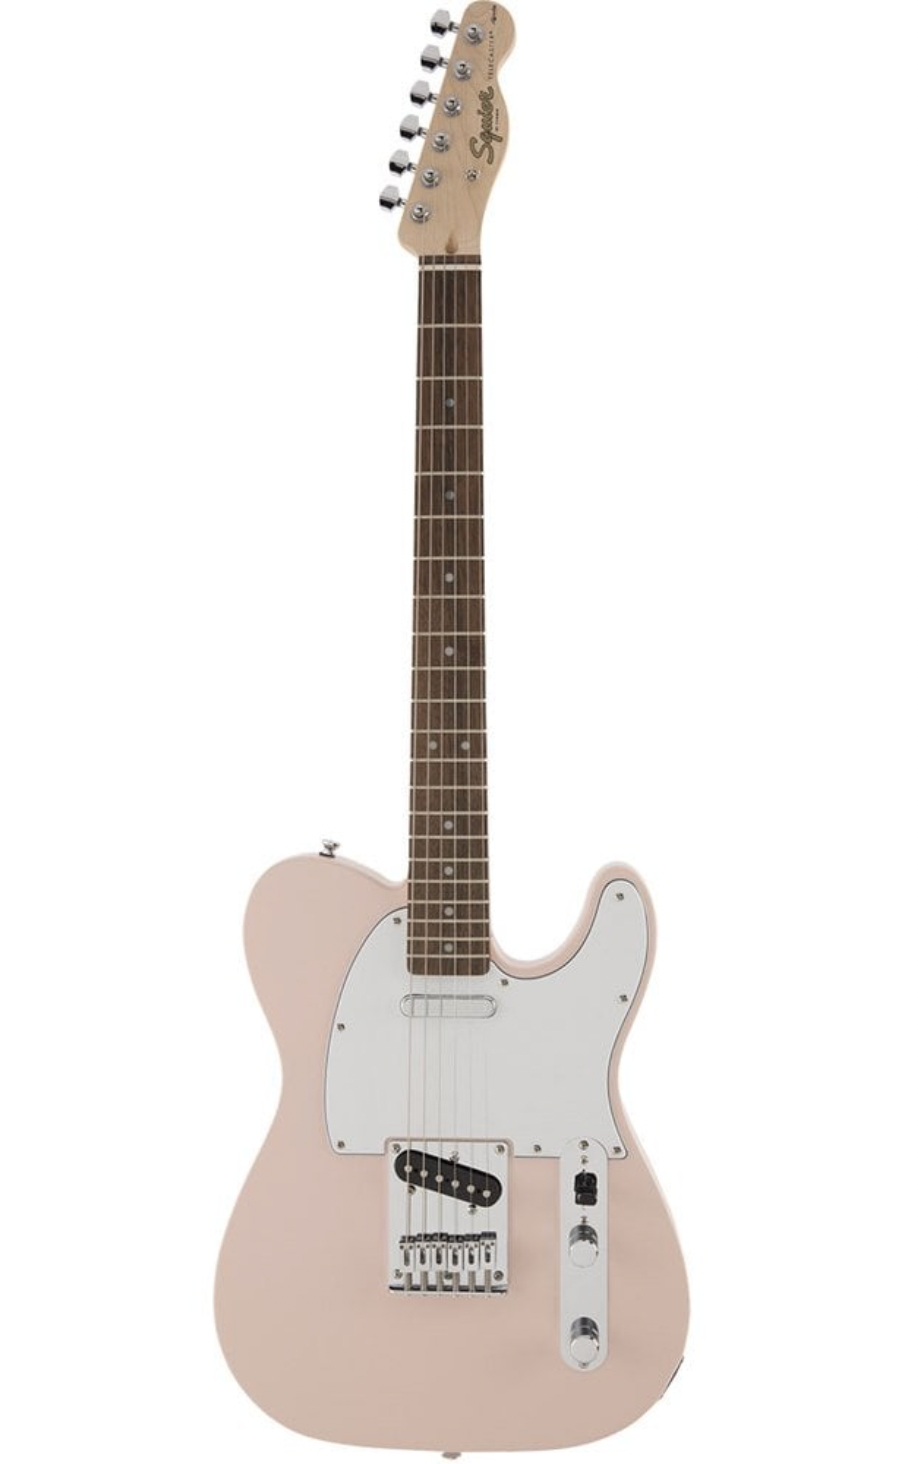 Fender Squier Telecaster (Signed by DMA's)